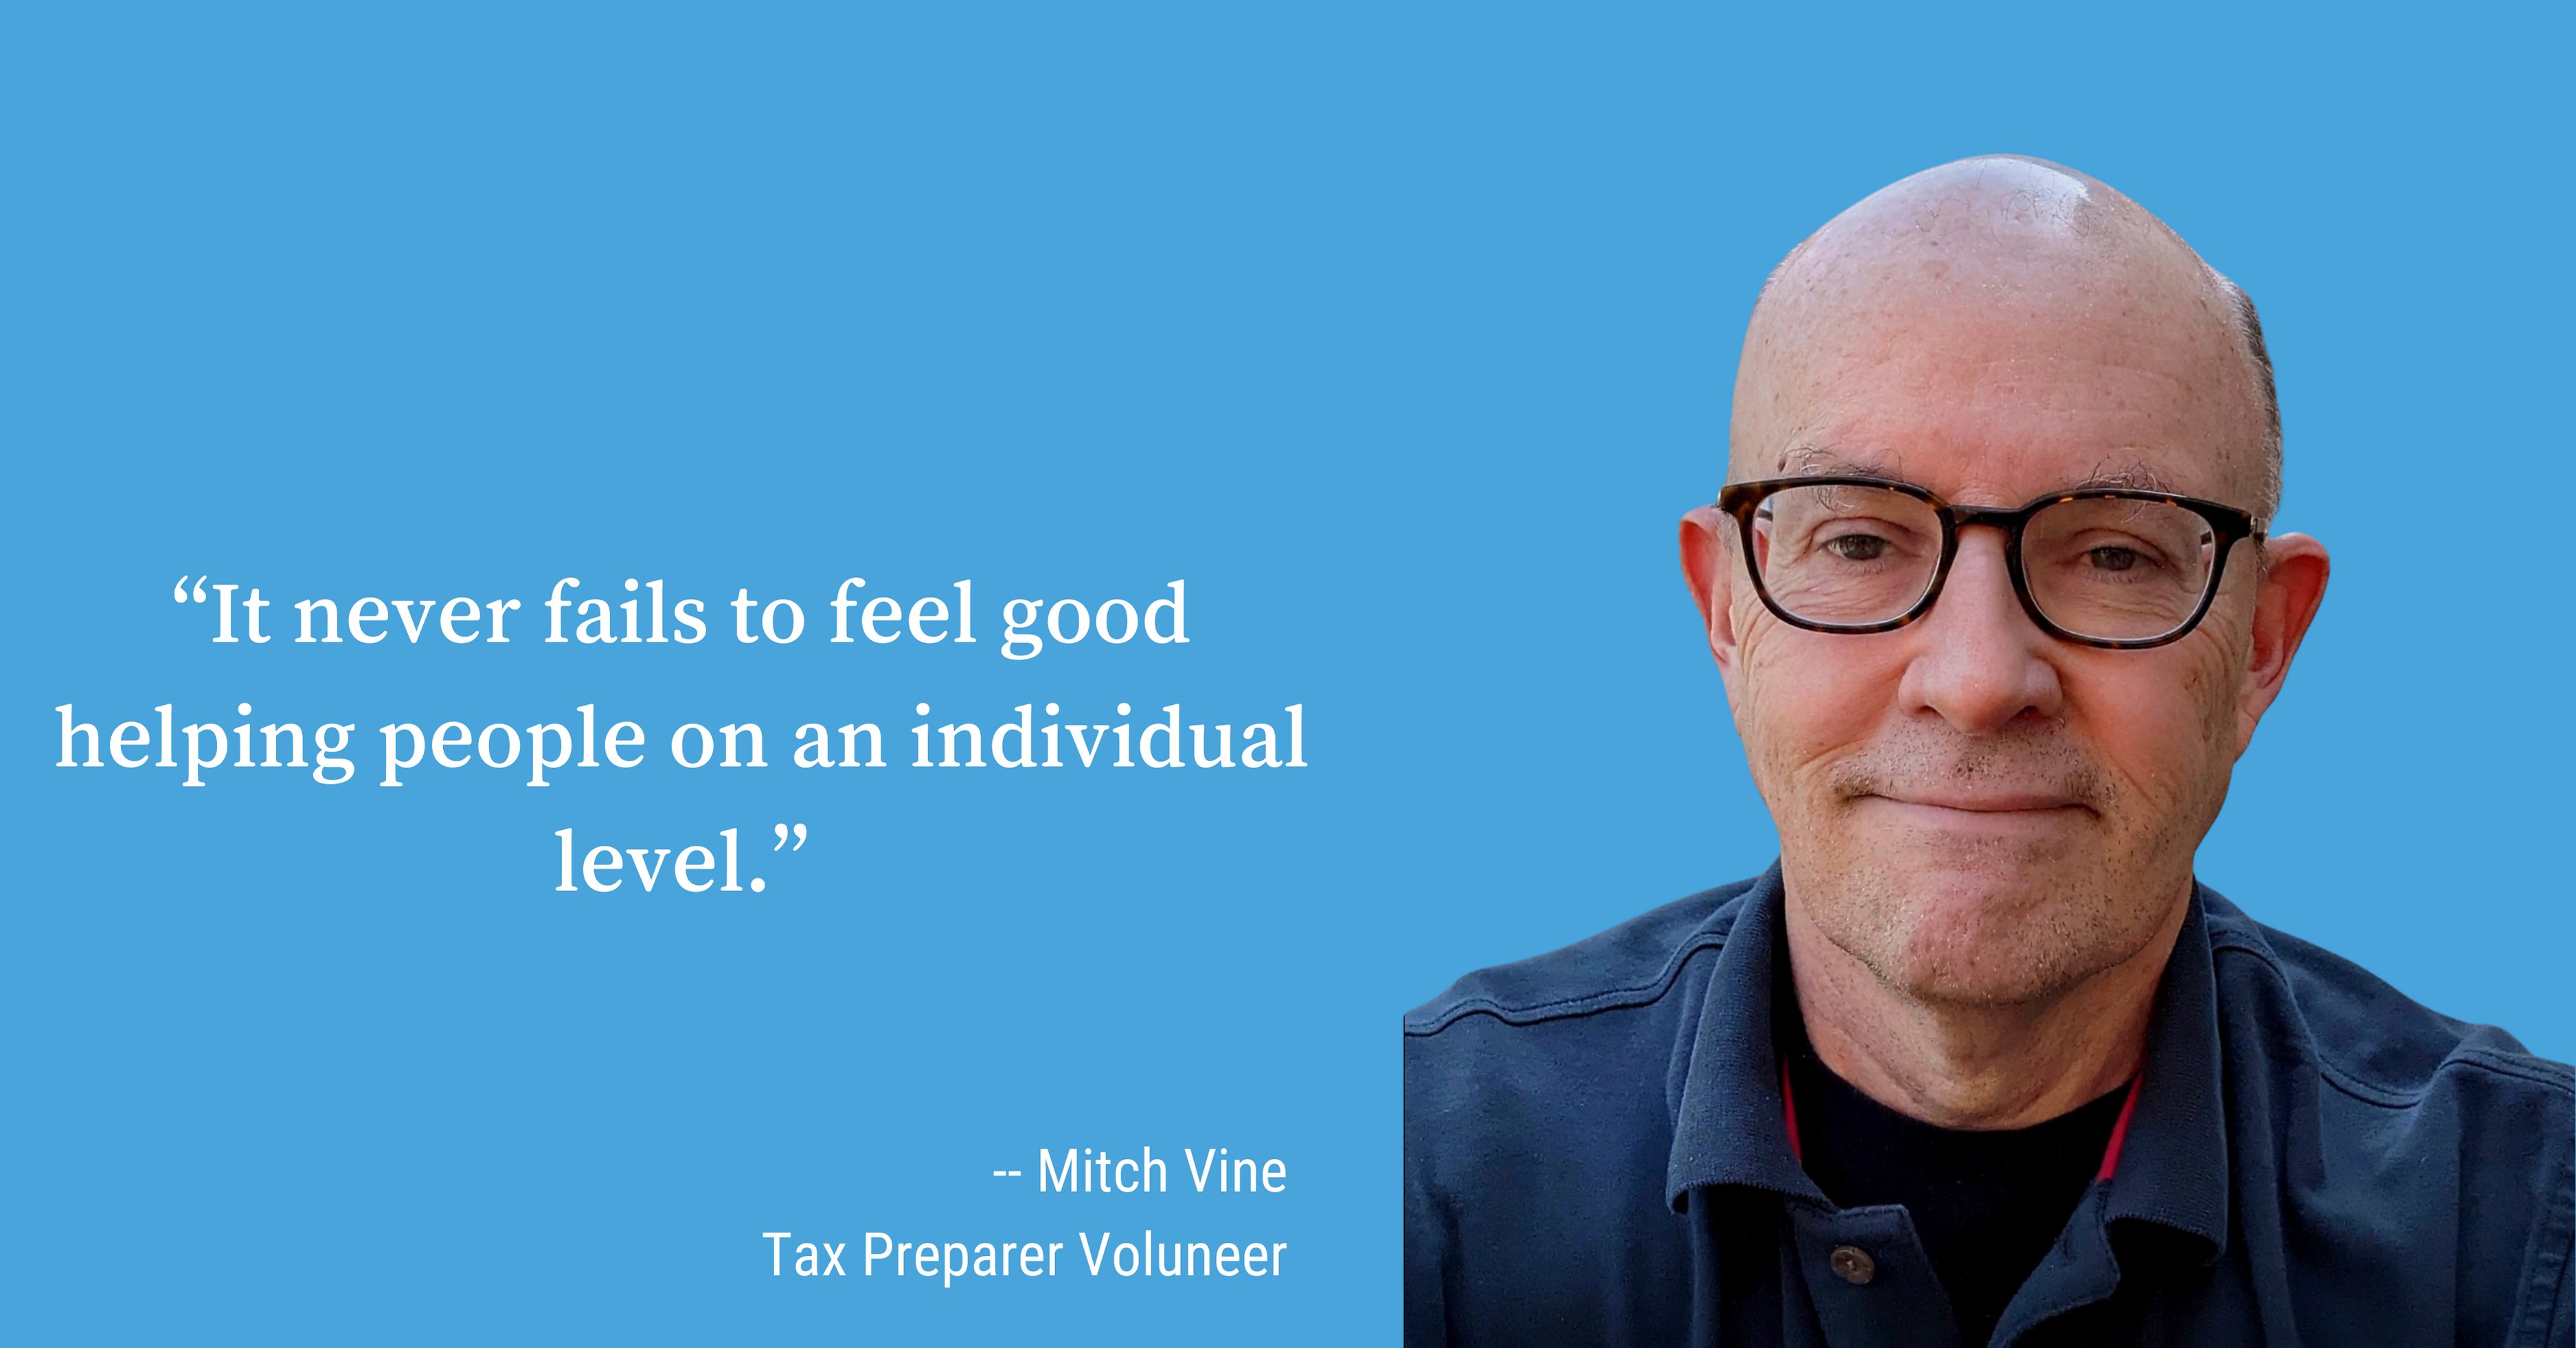 a man with a bald head and black rimmed glasses faces the camera on a blue background with a quote about being a tax preparer volunteer